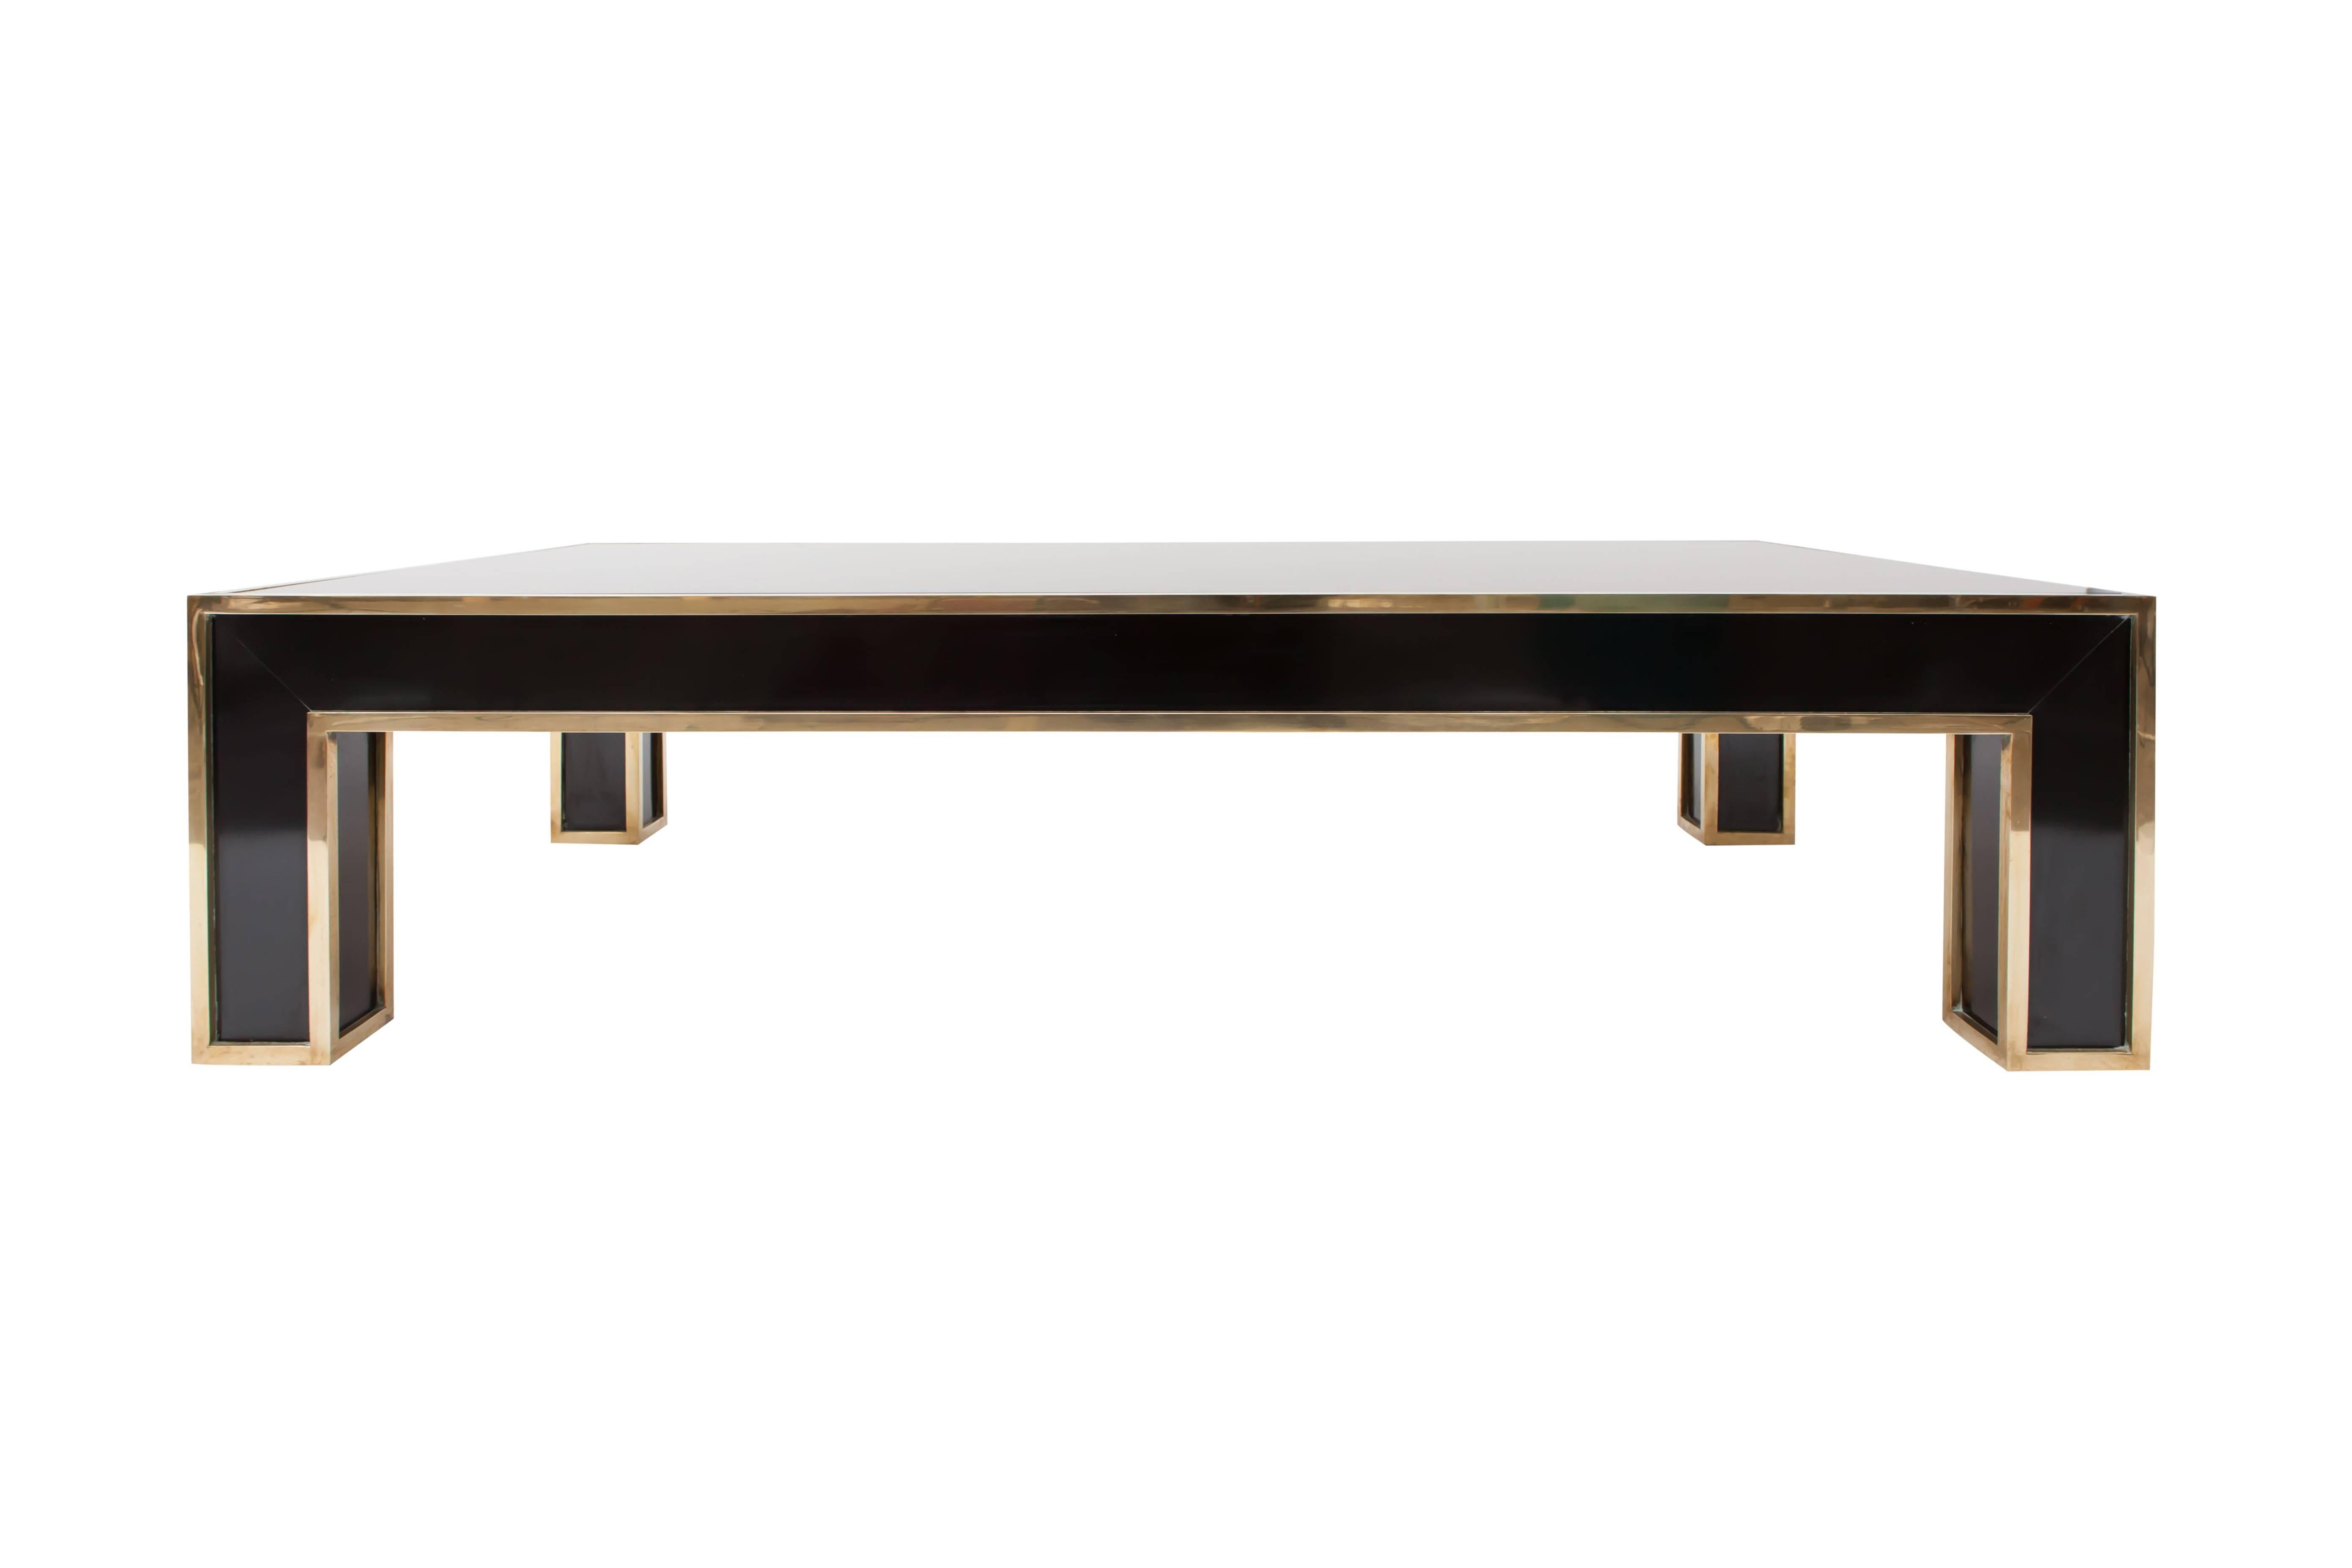 Romeo Rega designed this Black and Brass Rectangular Coffee Table
Italy, 1970s.
Black laminate, brass, smoked glass.
Measure: L 125 cm x W 80 cm x H 35 cm.
Would fit well in an eclectic interior inspired by Maison Jansen, Willy rizzo or other